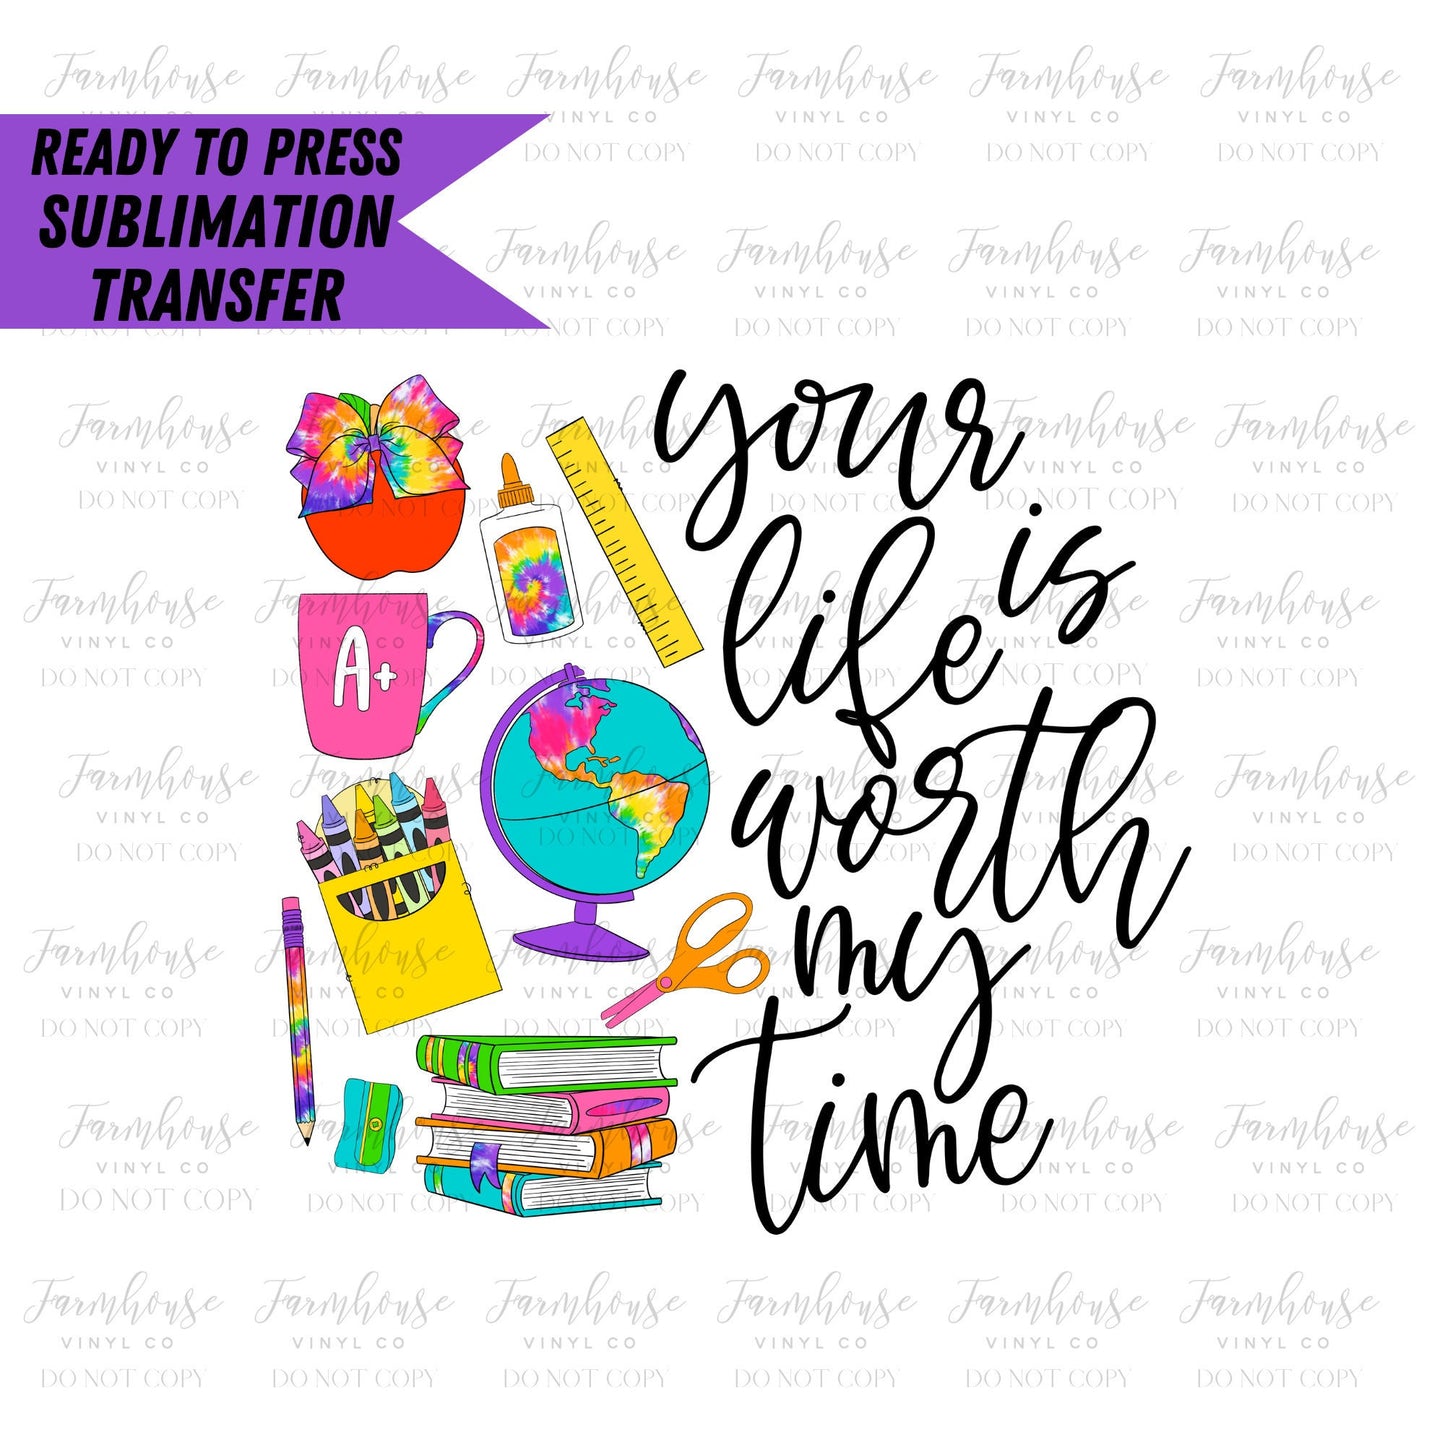 Your Life is Worth My Time, Ready to Press Sublimation Transfer, Sublimation Transfers, Heat Transfer, Teacher Design, 1st Day School Design - Farmhouse Vinyl Co